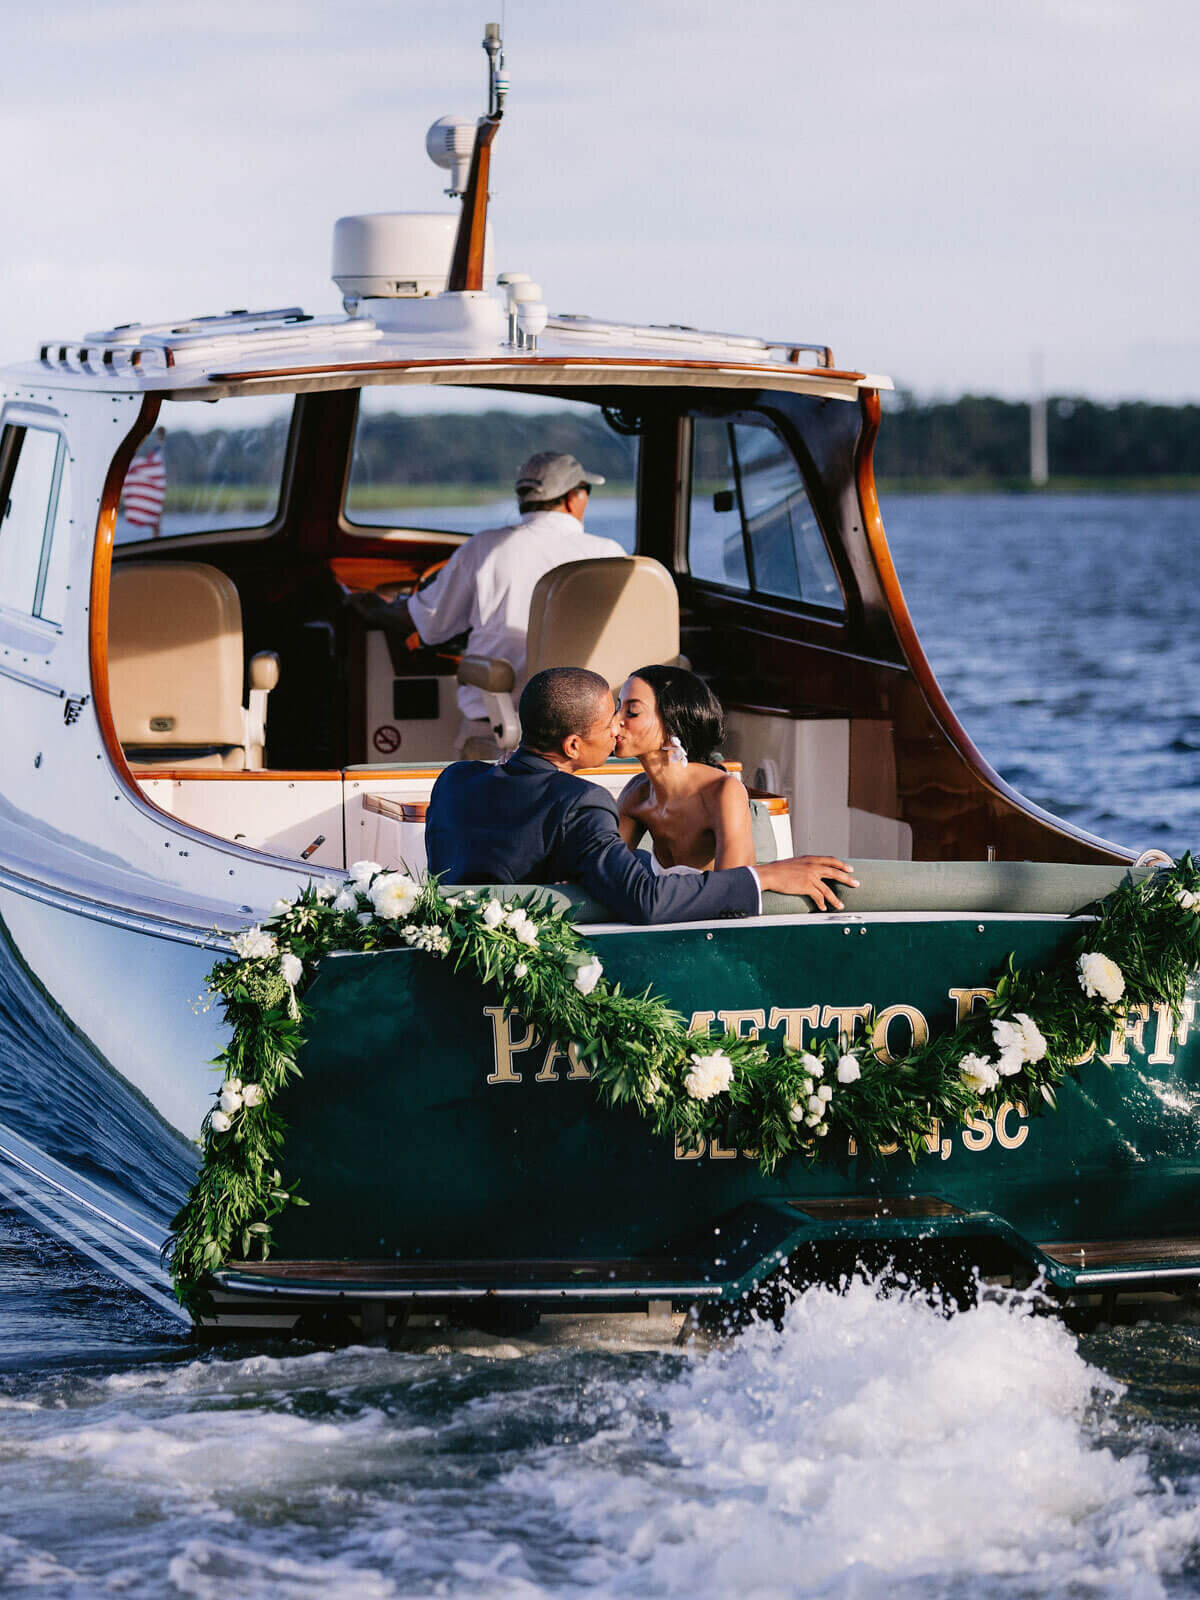 The bride and groom are kissing inside a moving yacht in Montage at Palmetto Bluff. Destination wedding image by Jenny Fu Studio